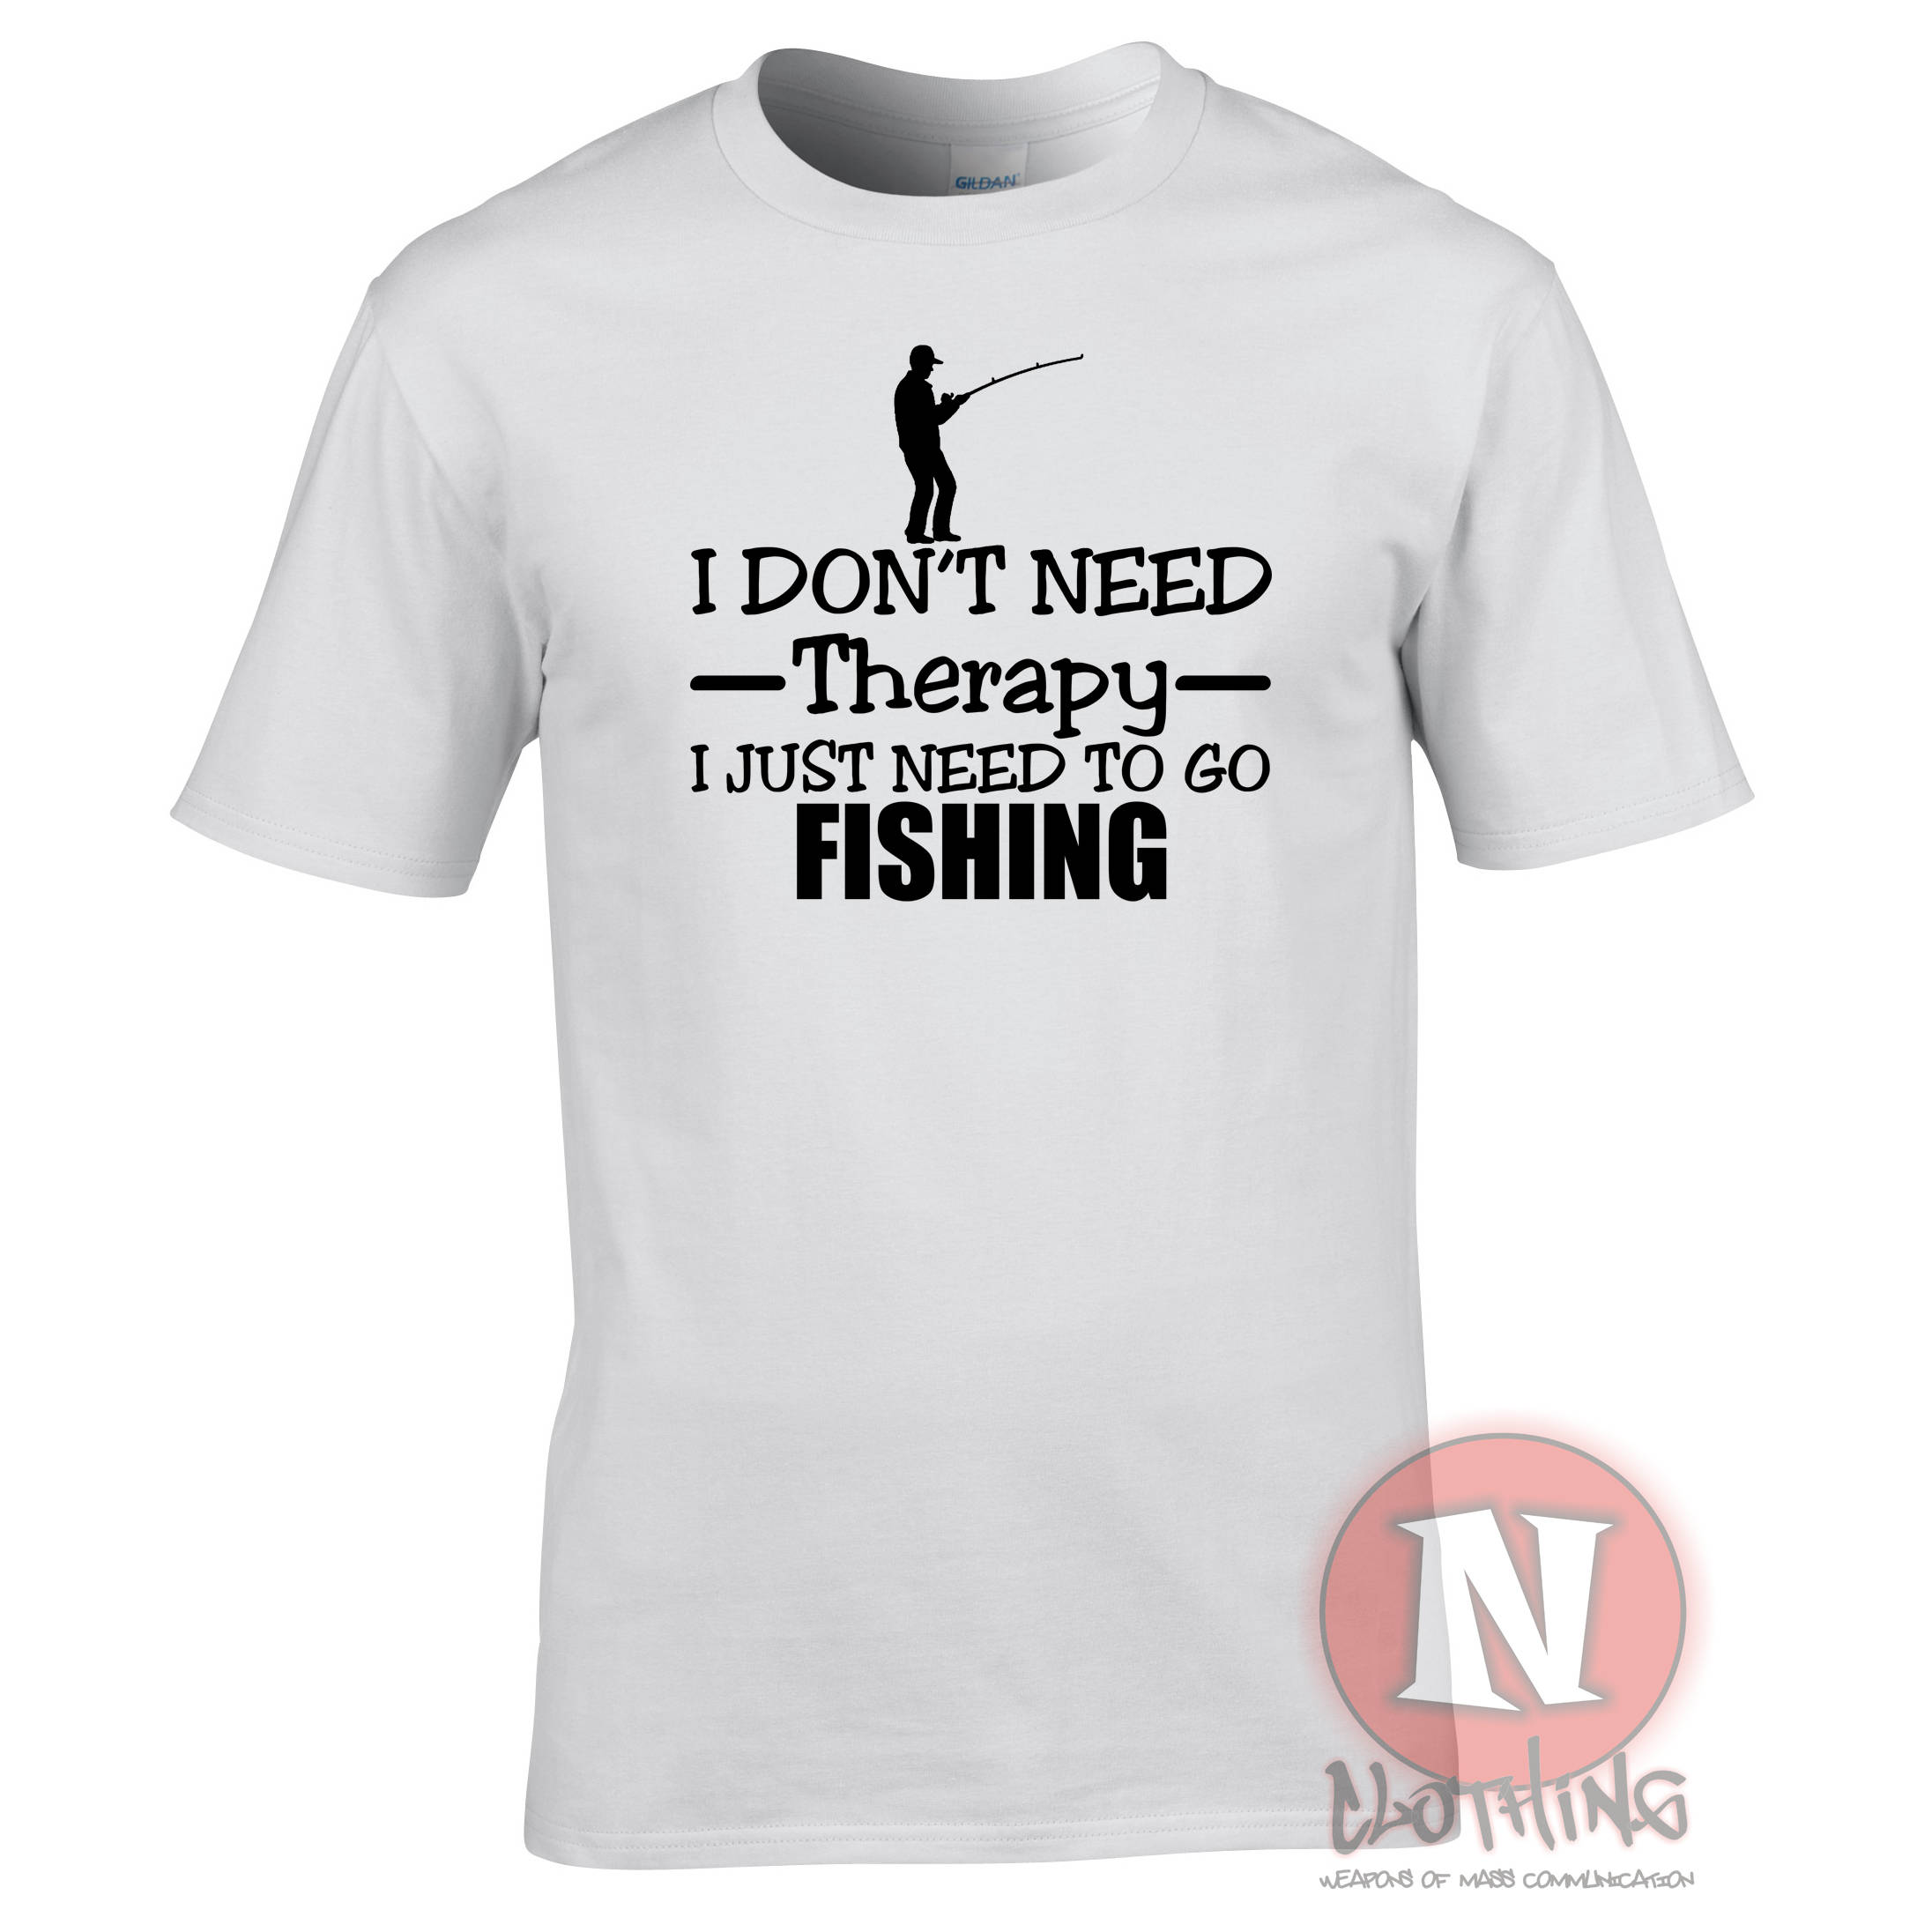 I Don't Need Therapy, I Just Need to Go Fishing T-shirt Tshirt Tee for  Anglers of the World. Gone Fishing 